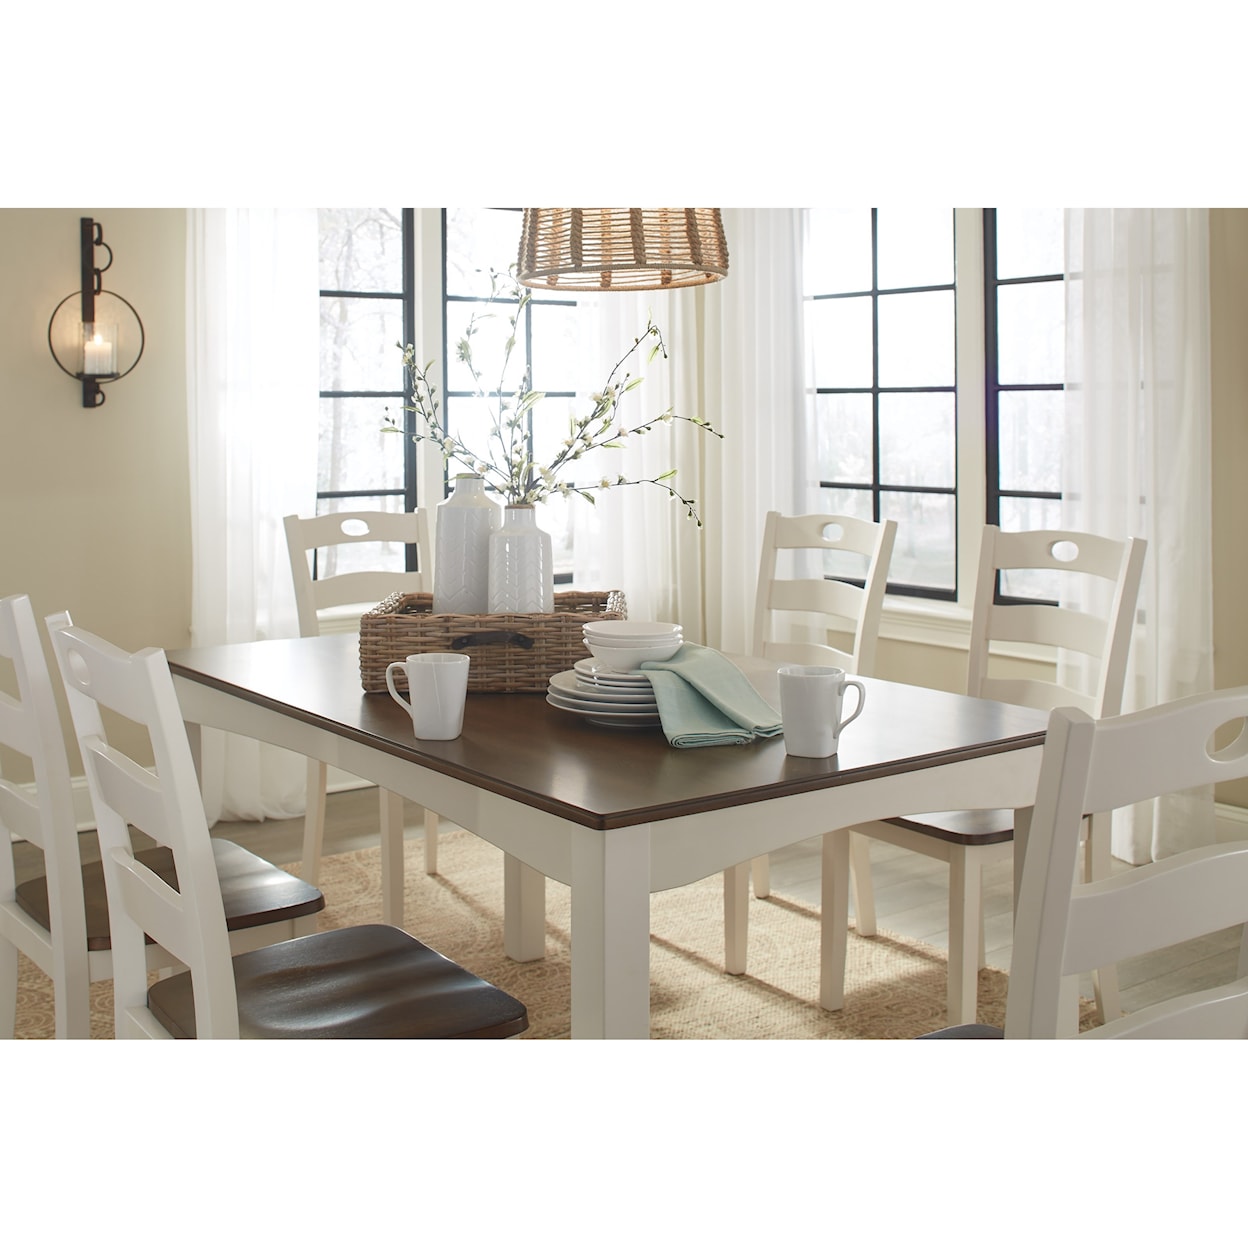 Signature Design by Ashley Woodanville 7-Piece Dining Room Table Set